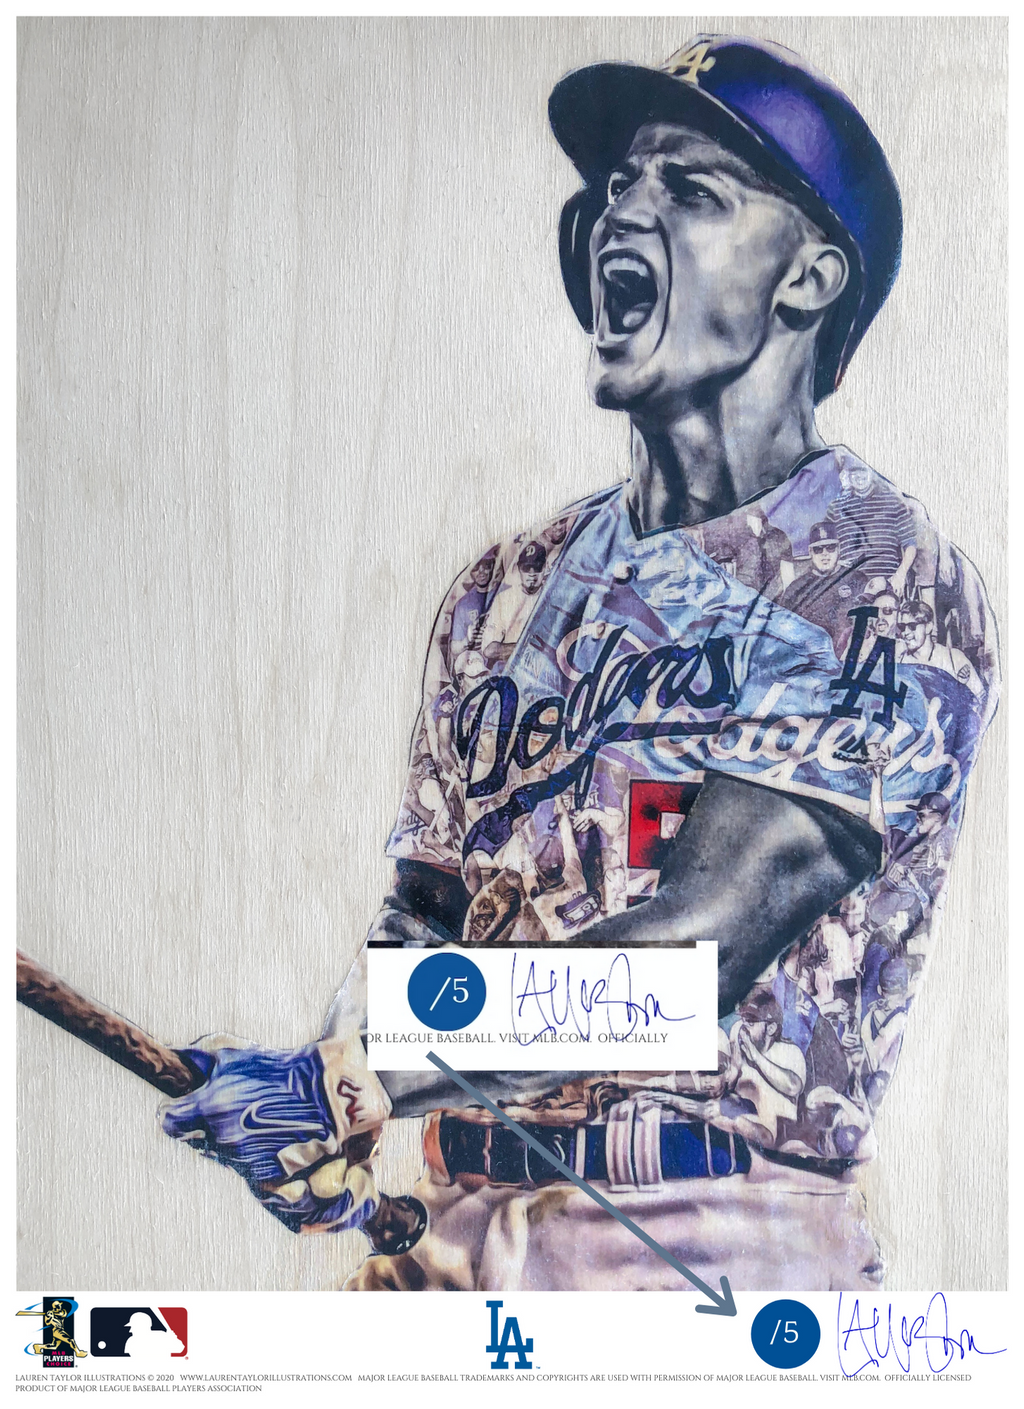 "C-Seag" (Corey Seager) Los Angeles Dodgers - Officially Licensed MLB Print - BLUE SIGNATURE LIMITED RELEASE /5